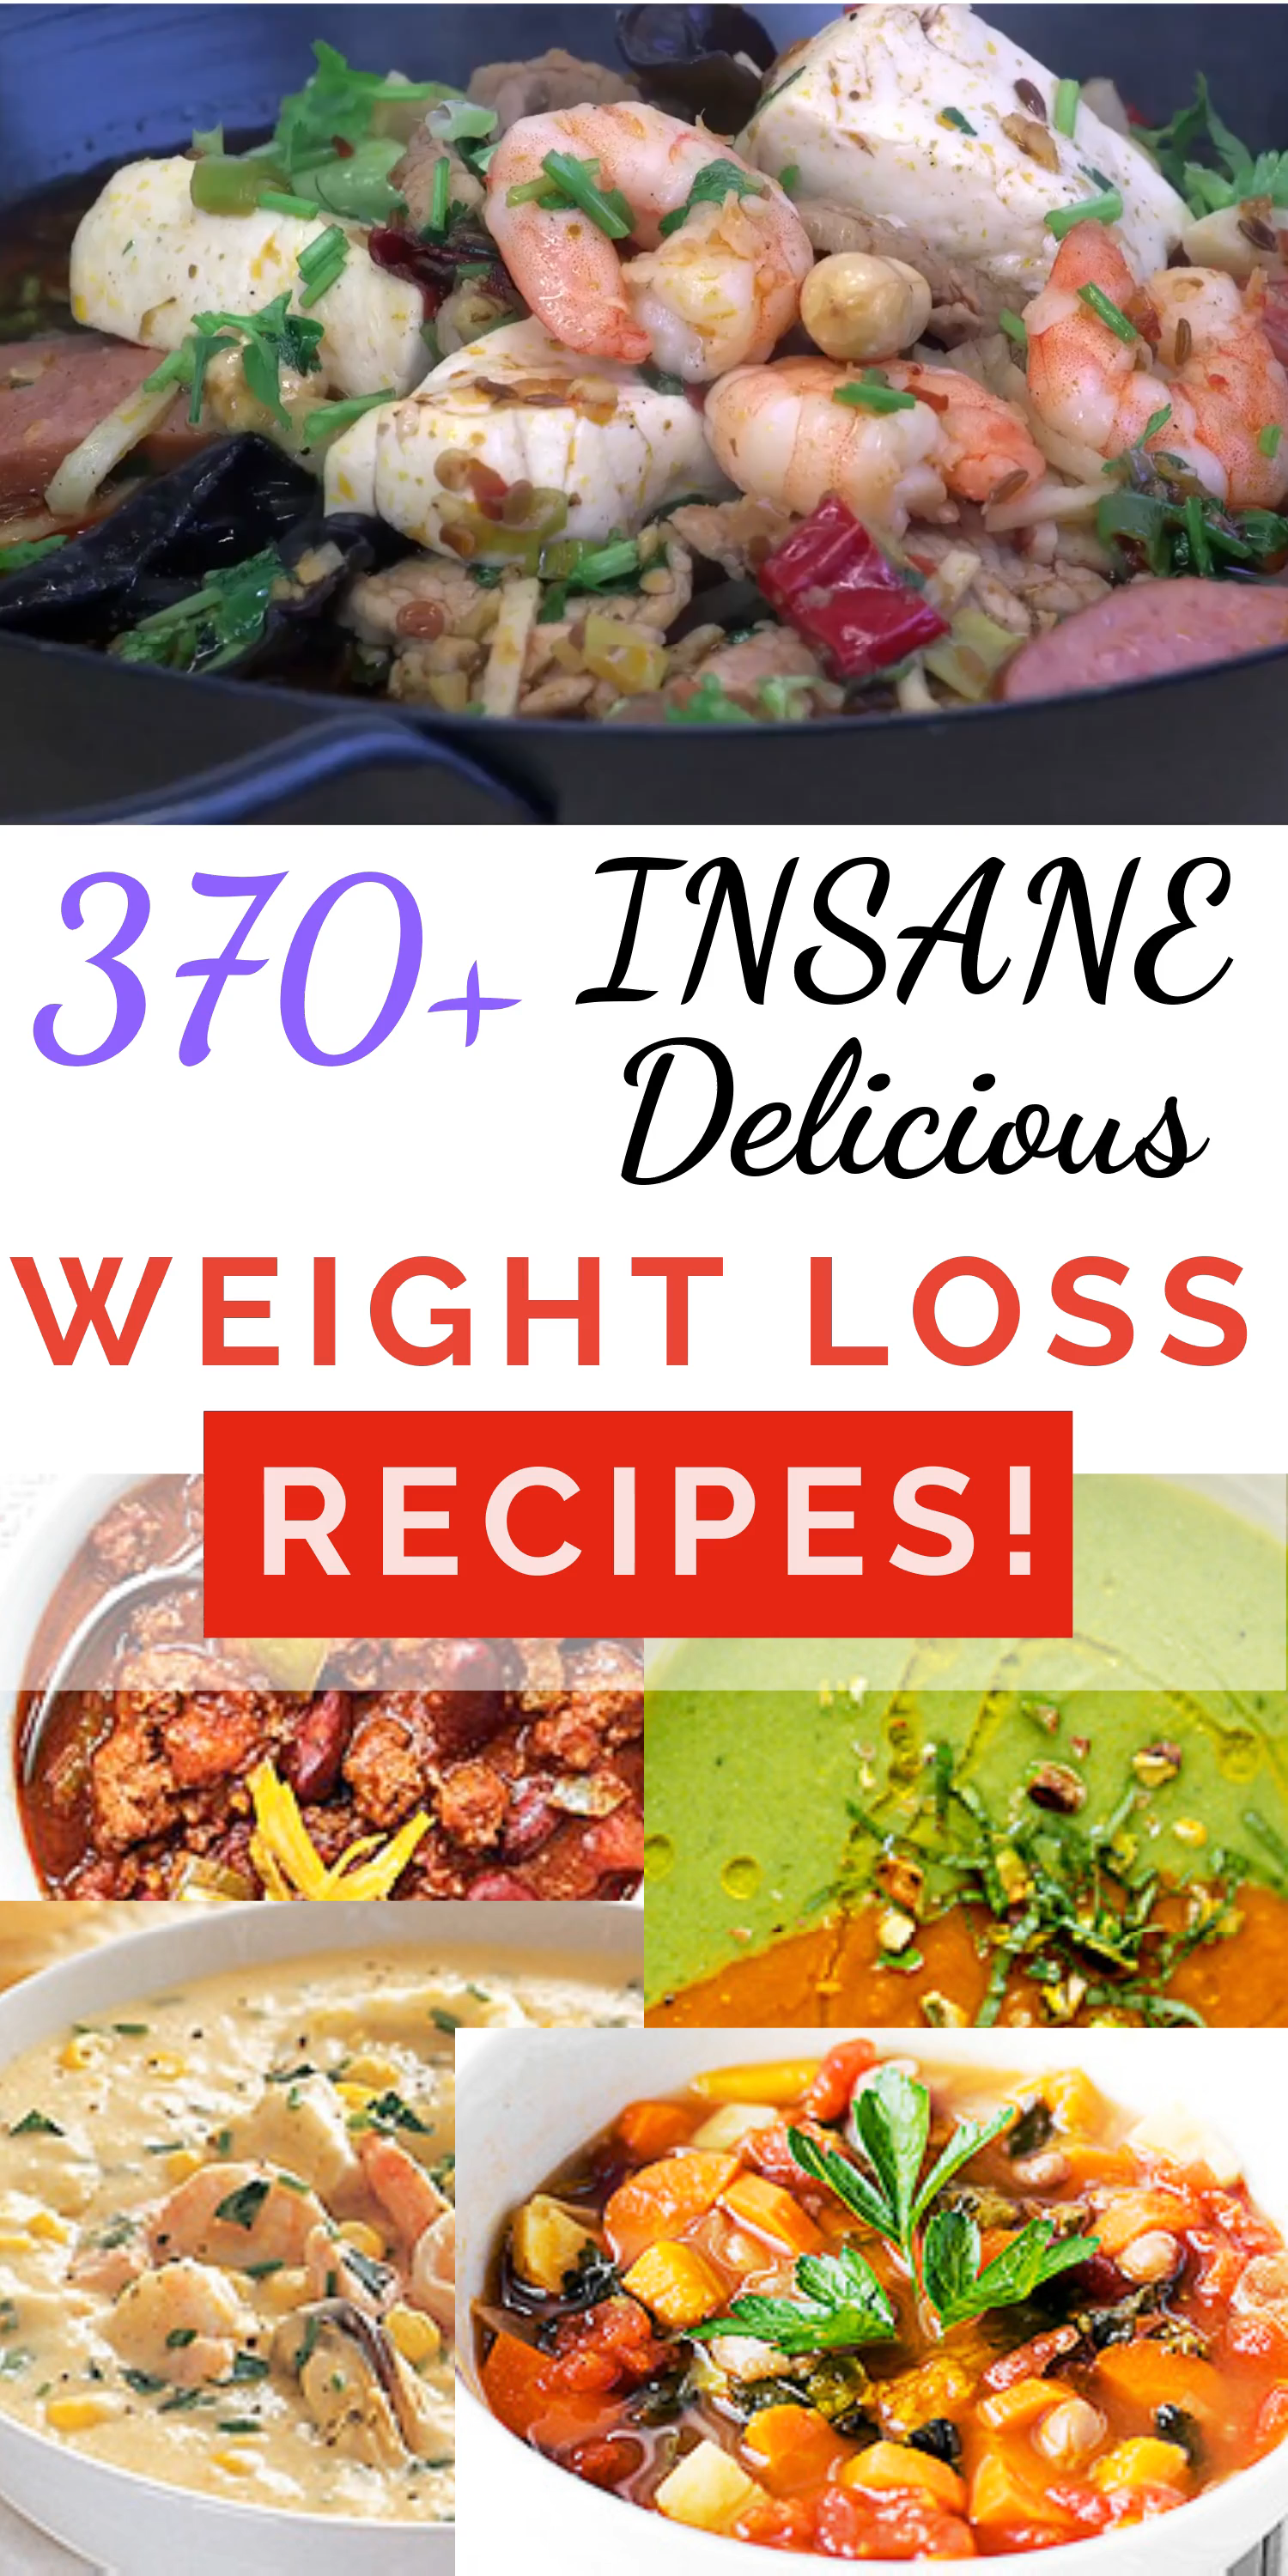 Download 370+ INSANE Delicious Weight Loss Recipes to lose weight and belly fat fast! -   18 healthy recipes For Weight Loss fish ideas